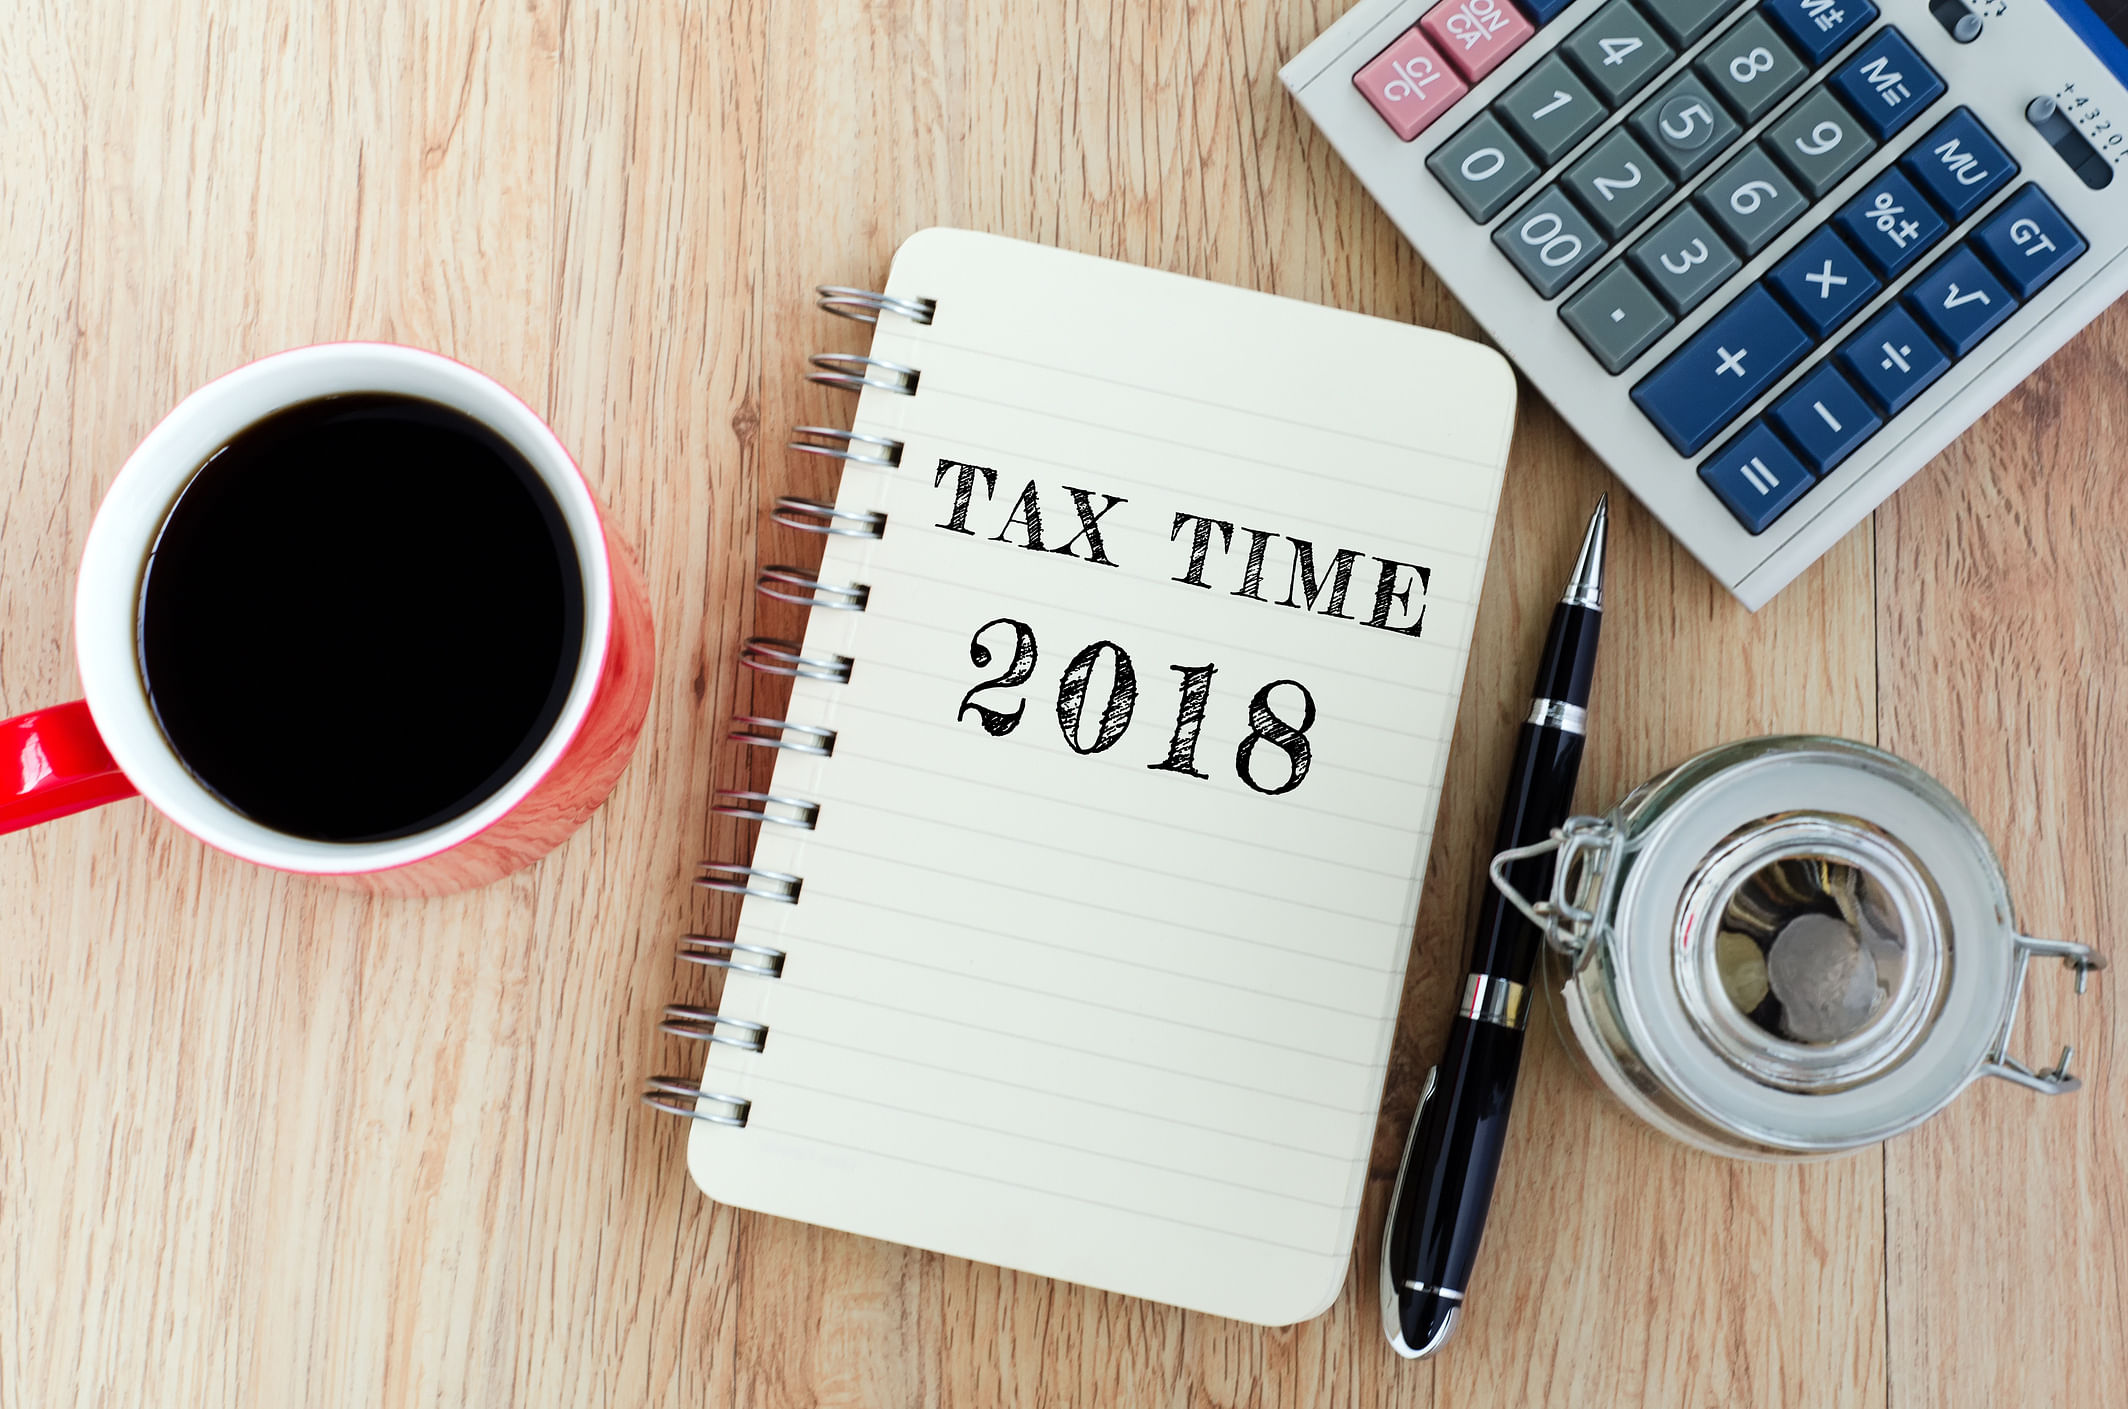 Against the target of Rs 14.80 lakh crore for 2018-19, the actual tax receipts until July is only Rs 2.92 lakh crore, shows the latest data by the Controller General of Accounts. Representative image